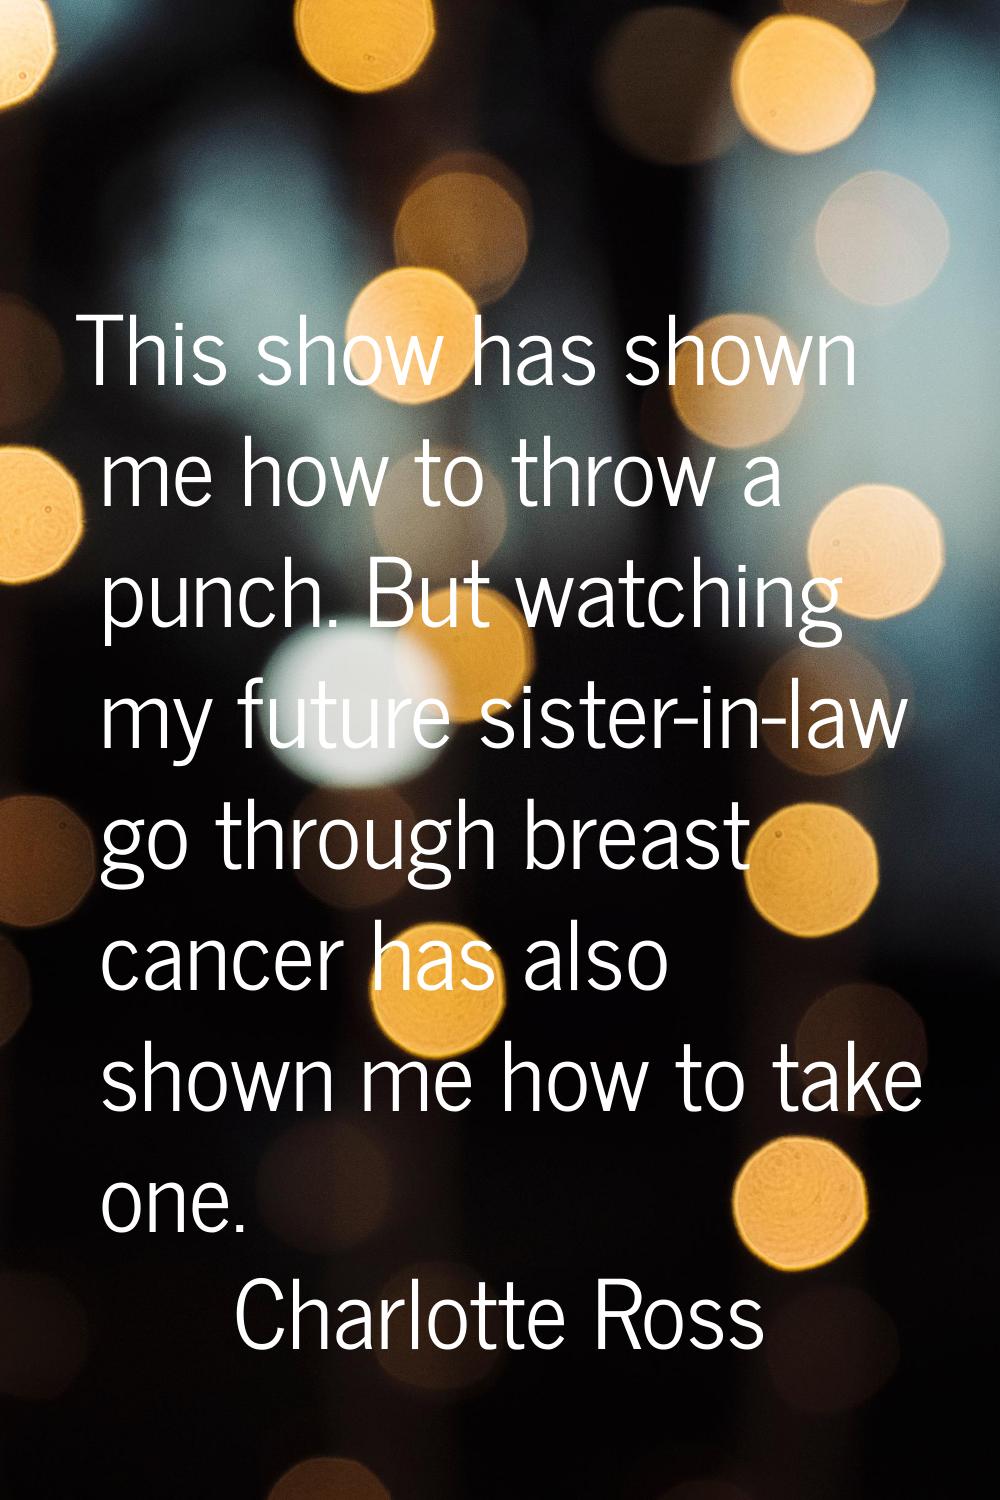 This show has shown me how to throw a punch. But watching my future sister-in-law go through breast